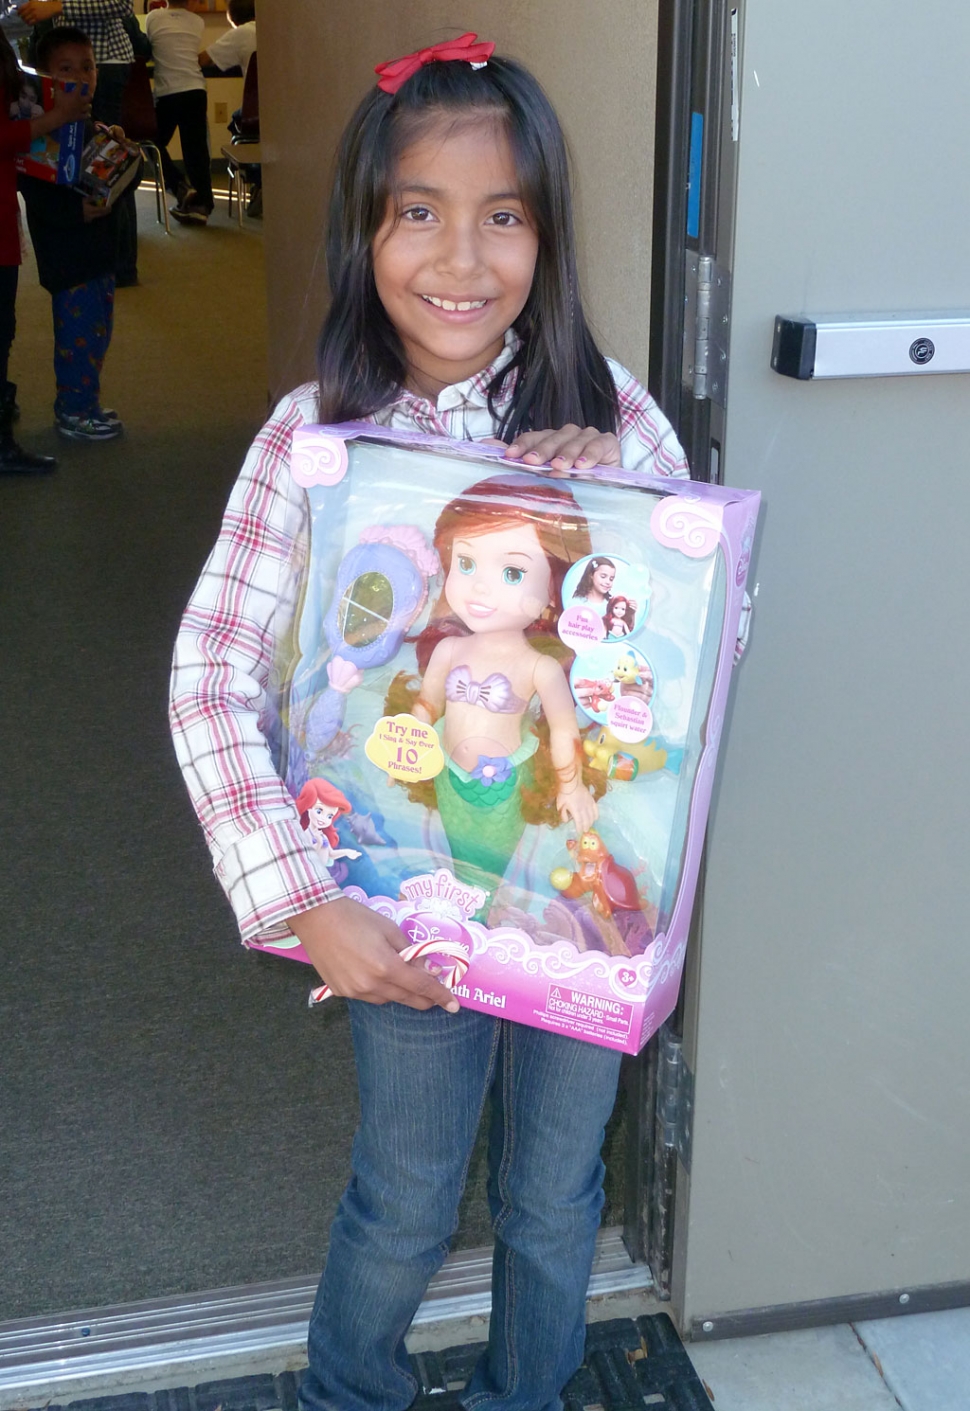 Bethany was very happy for her gift.